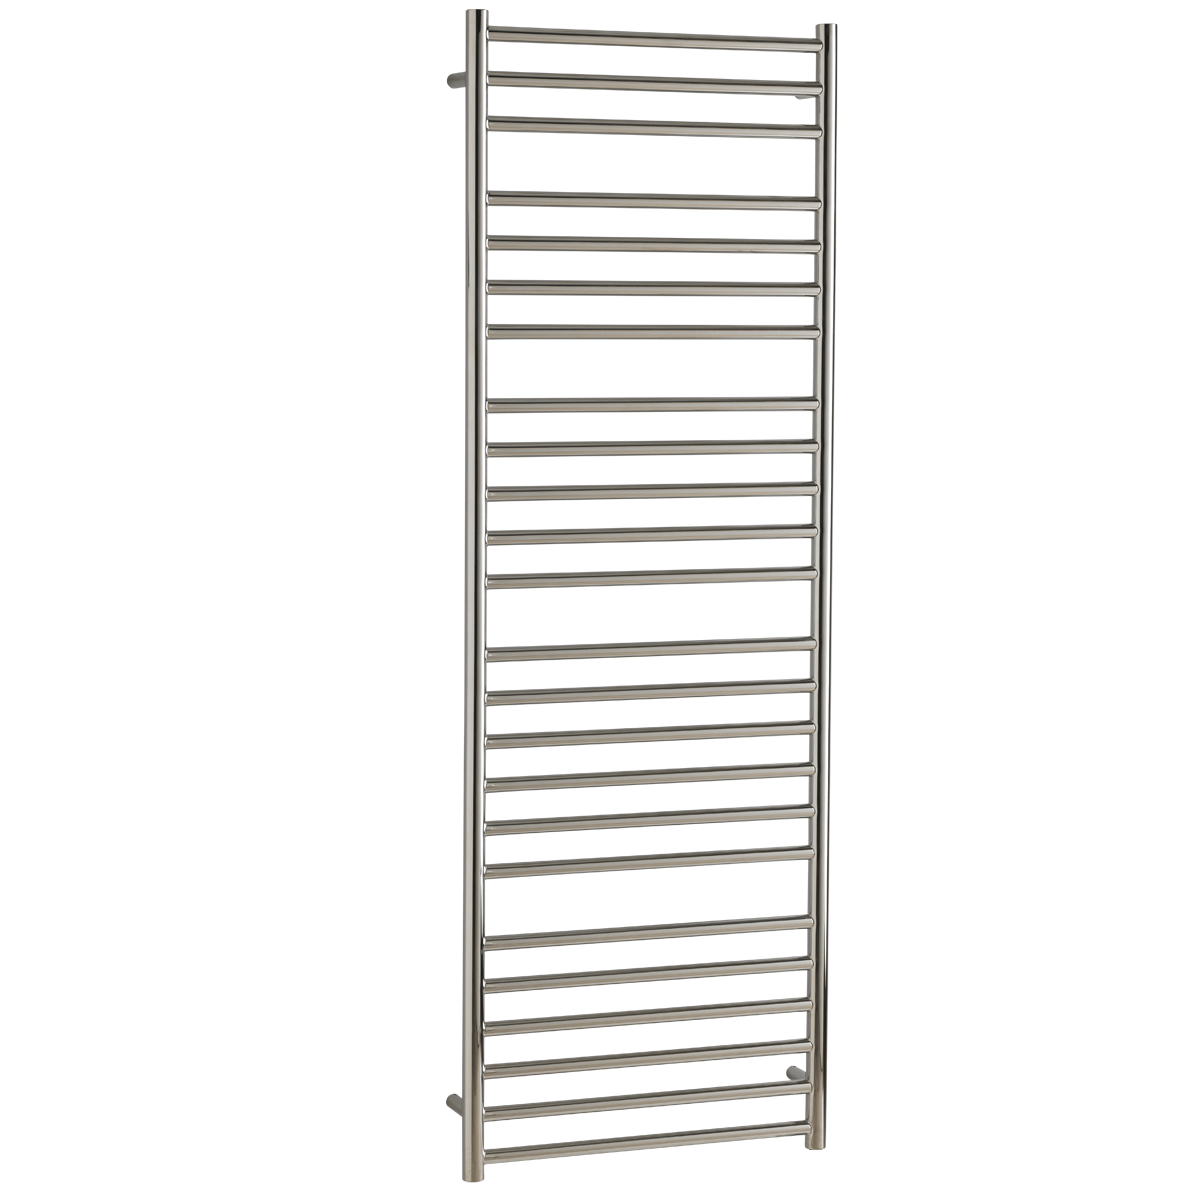 Aura Steel Stainless Steel Smart Electric Towel Rail with Thermostat, Timer + WiFi Control